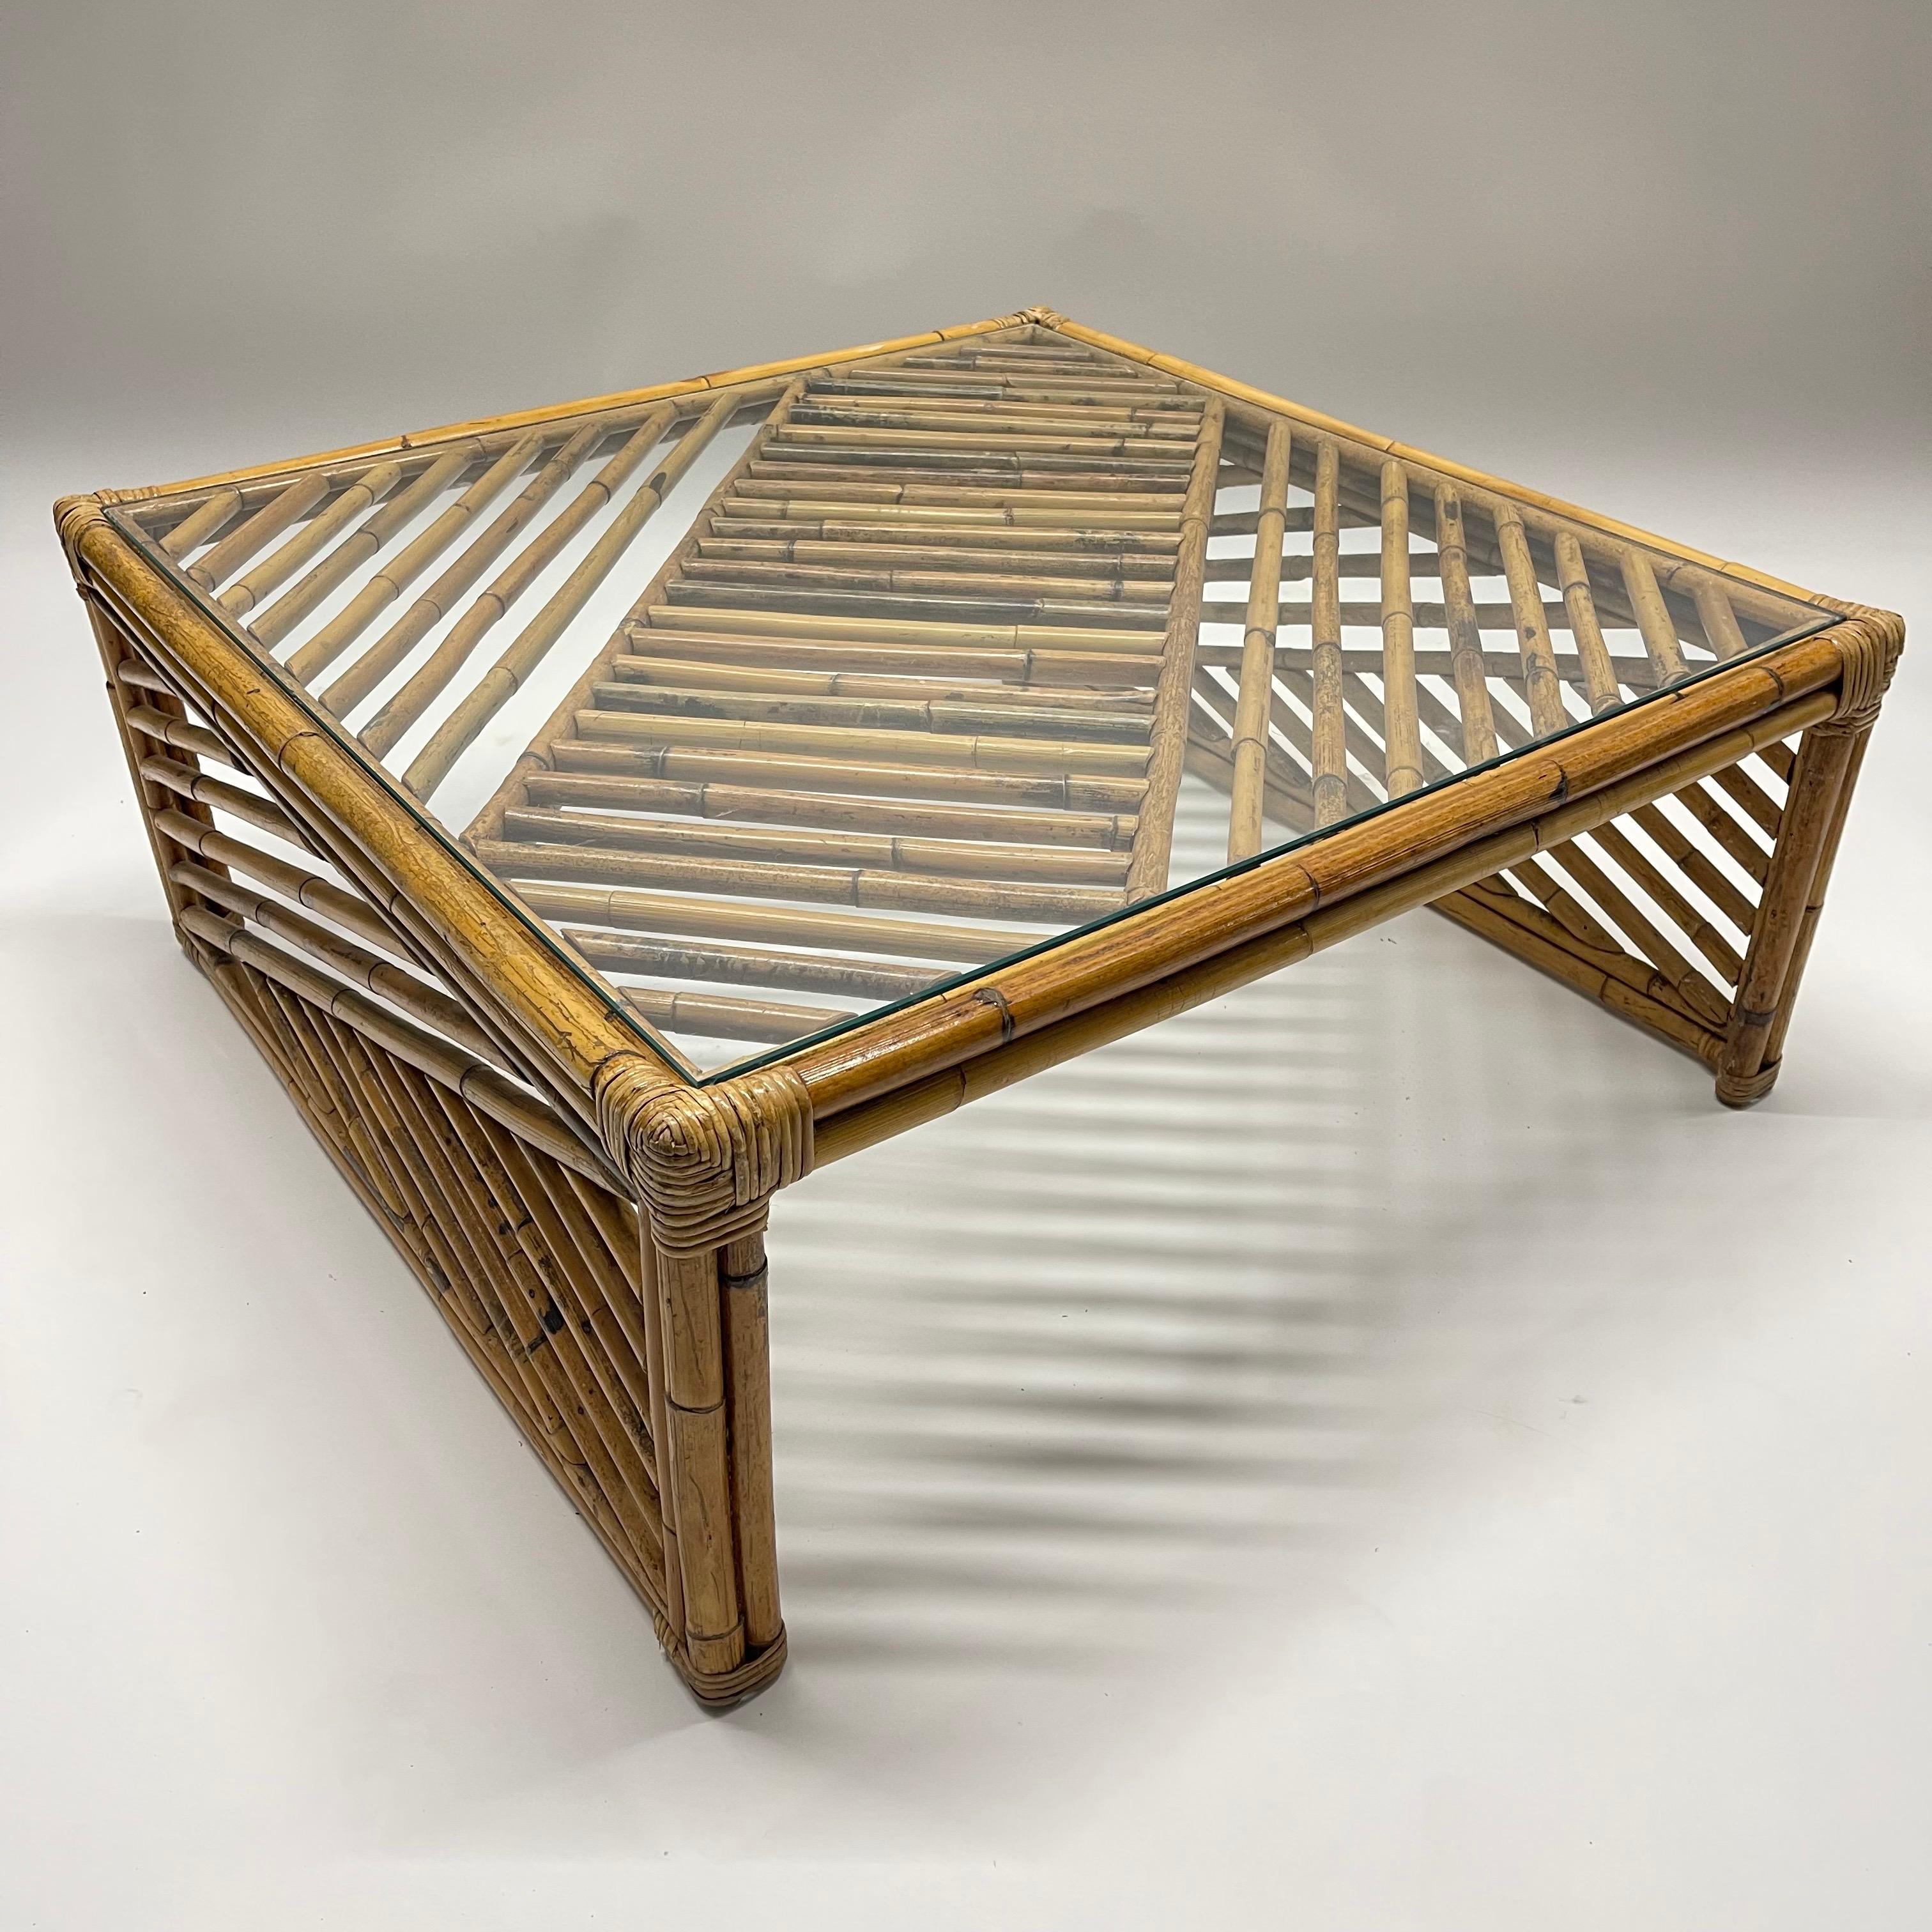 Post-Modern mid century geometric design coffee or cocktail table rendered in rattan bamboo with a glass top, 1970s.